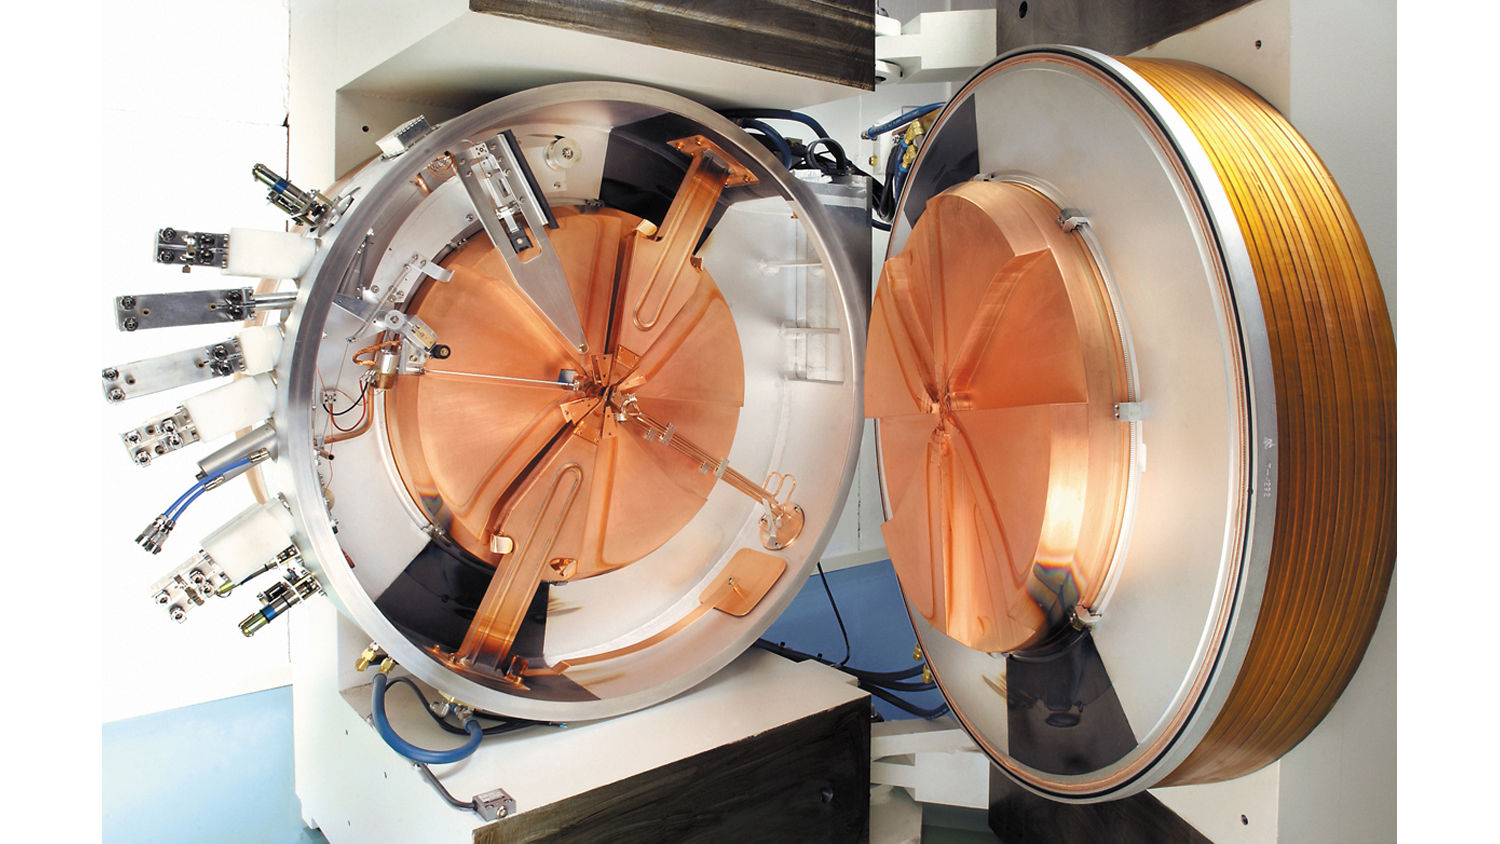 Medical Cyclotron Market Survey Report 2019 Along with Statistics, Forecasts till 2024